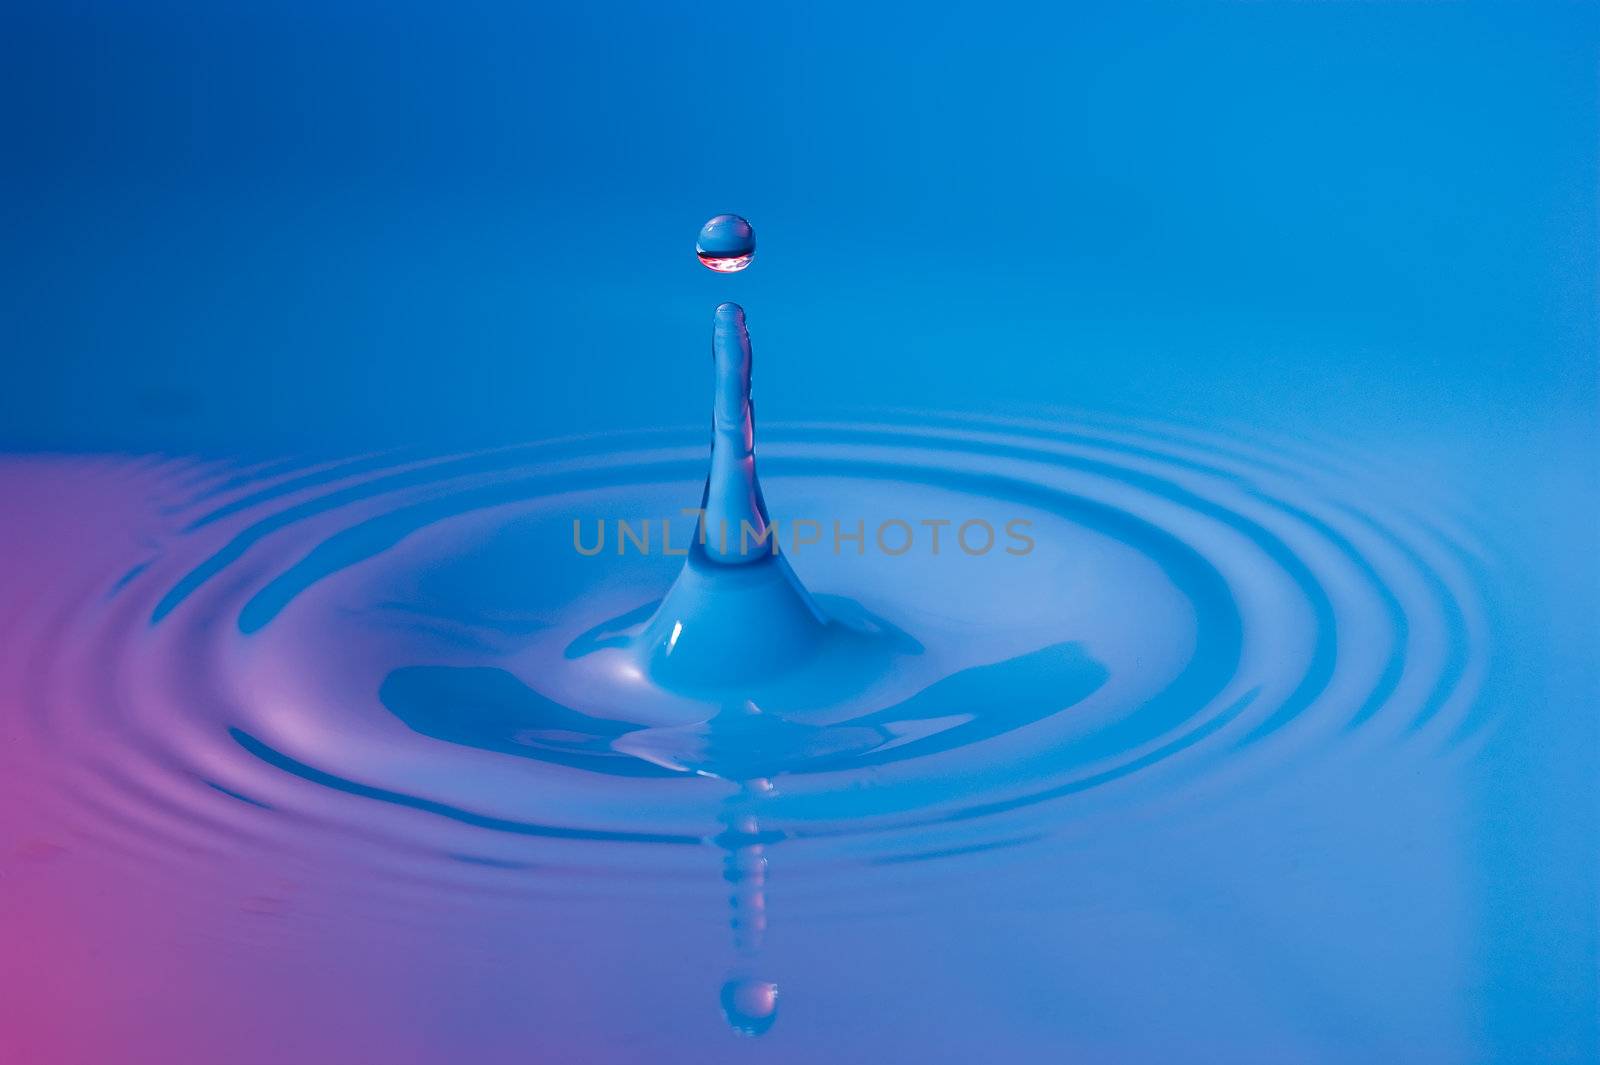 A drop of the water